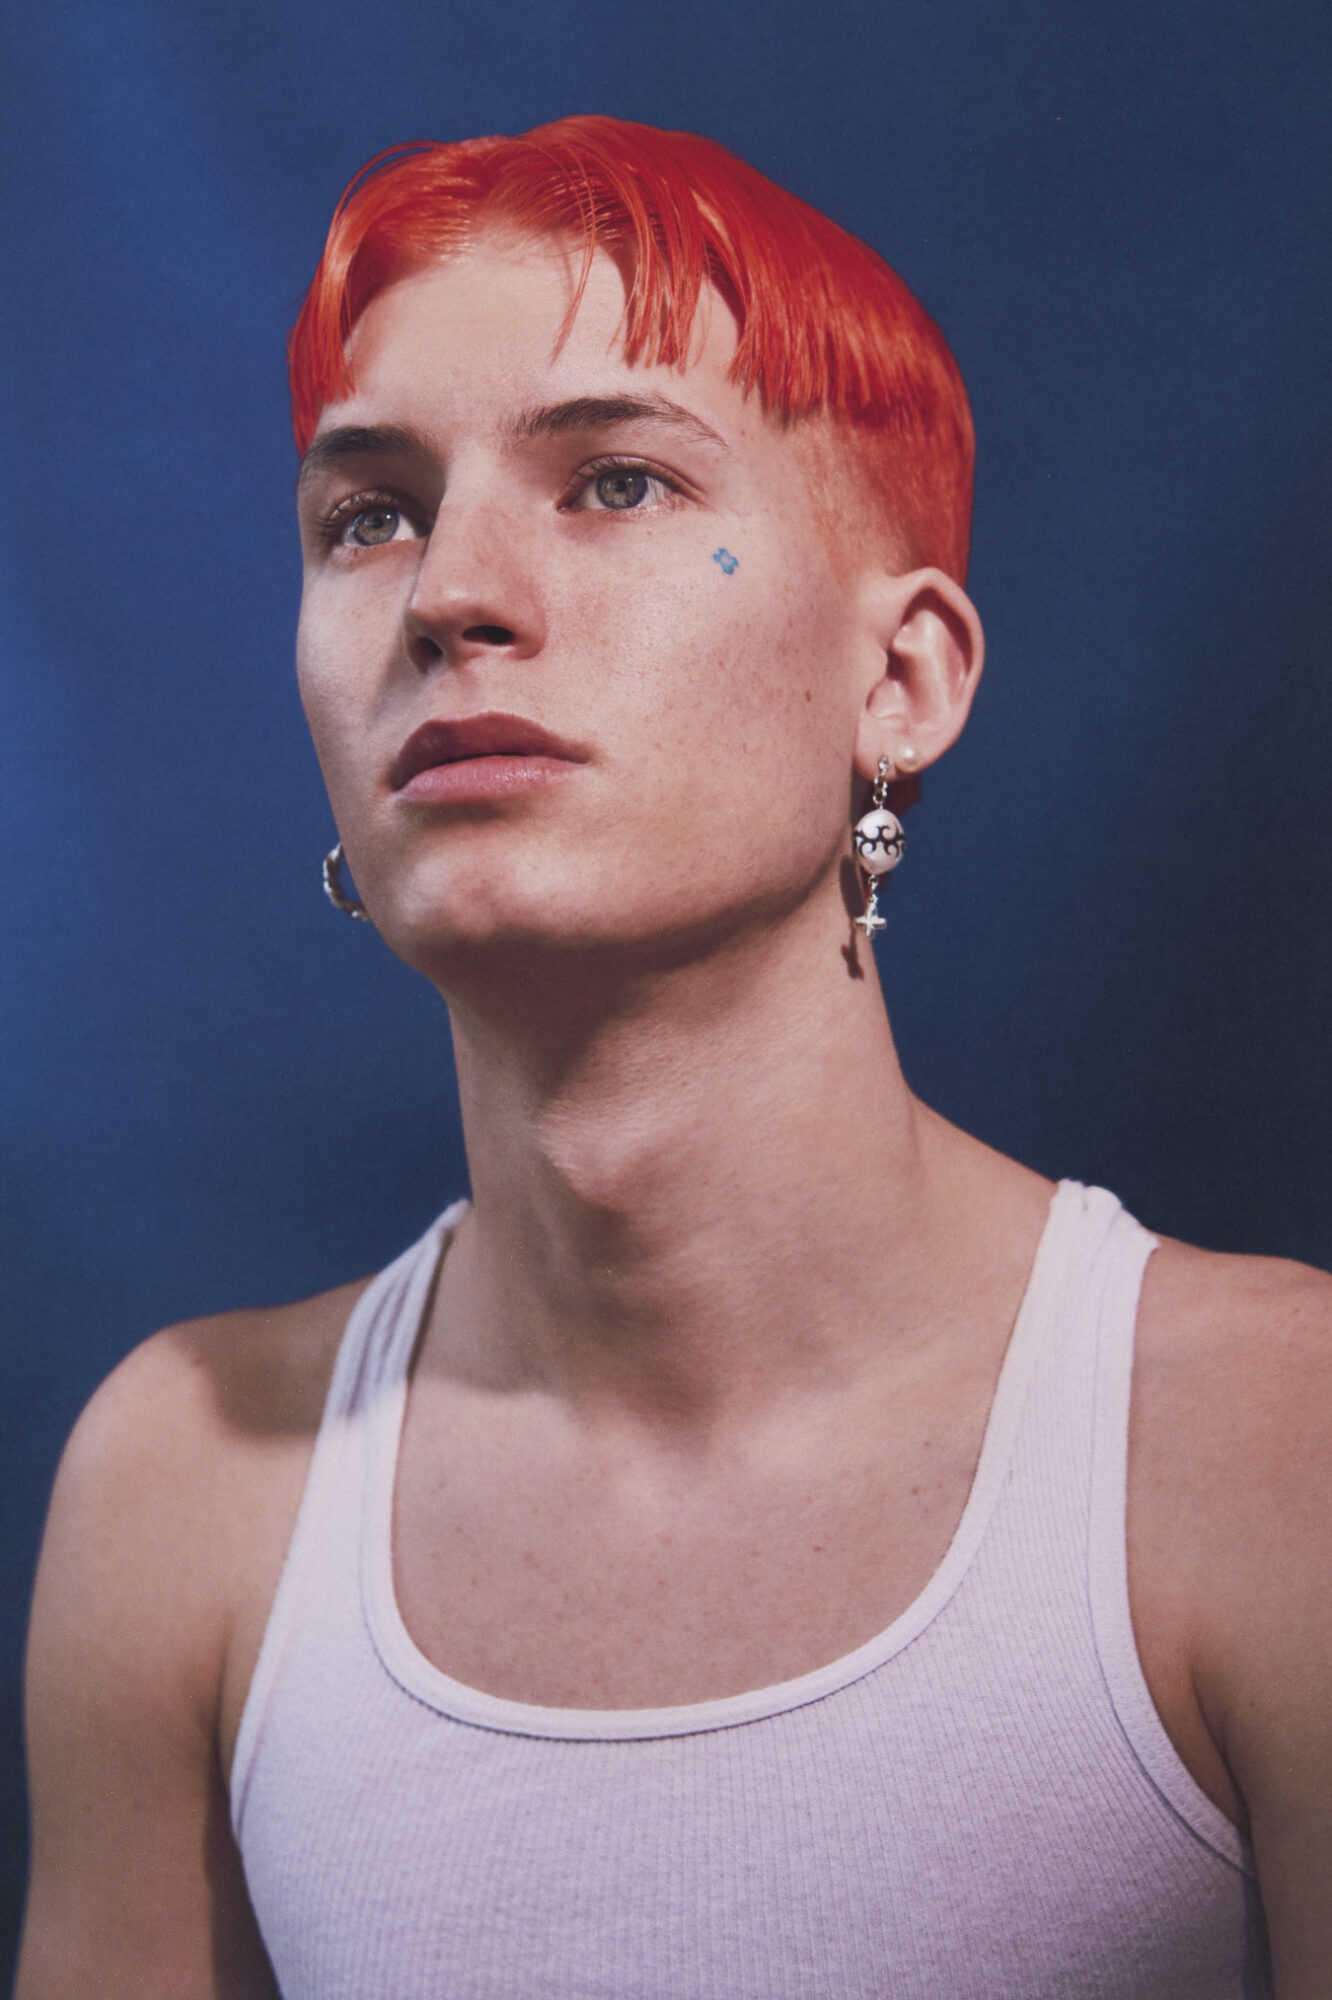 Gus Dapperton musician singer red haired man with earrings